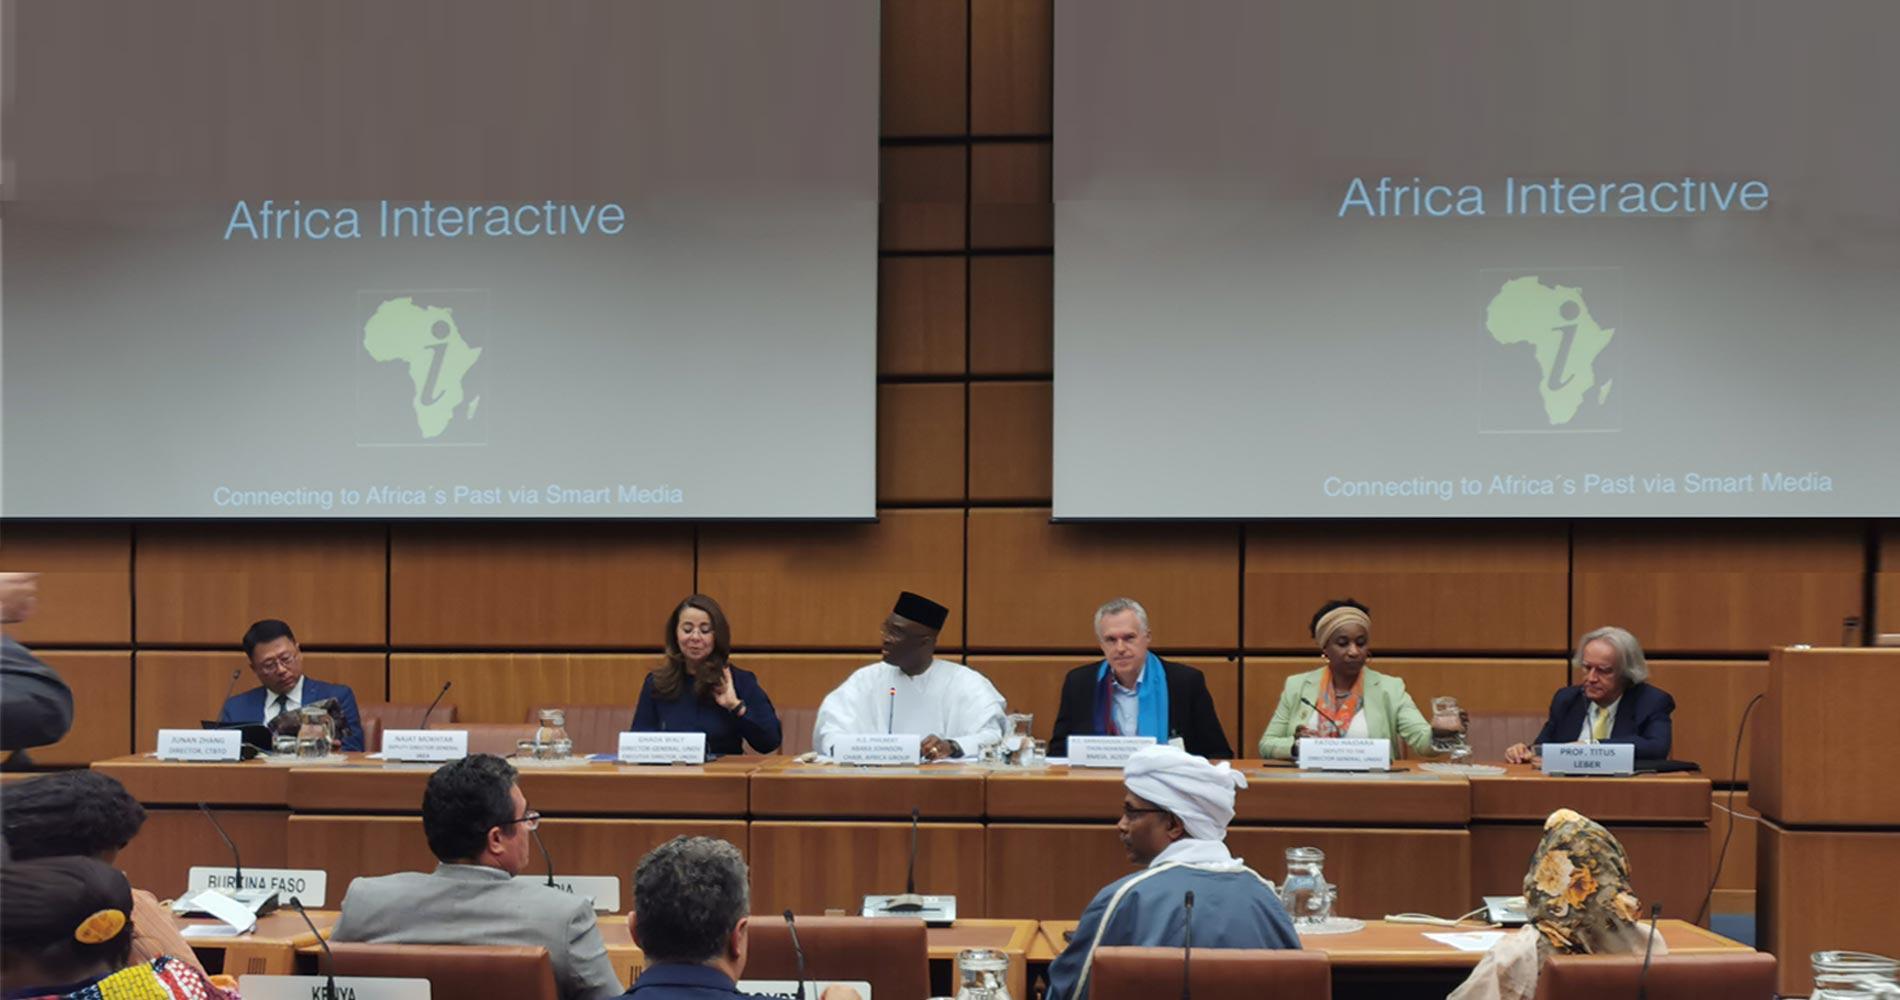 UN Africa Day Celebration Launches ‘Africa Interactive’ in Vienna